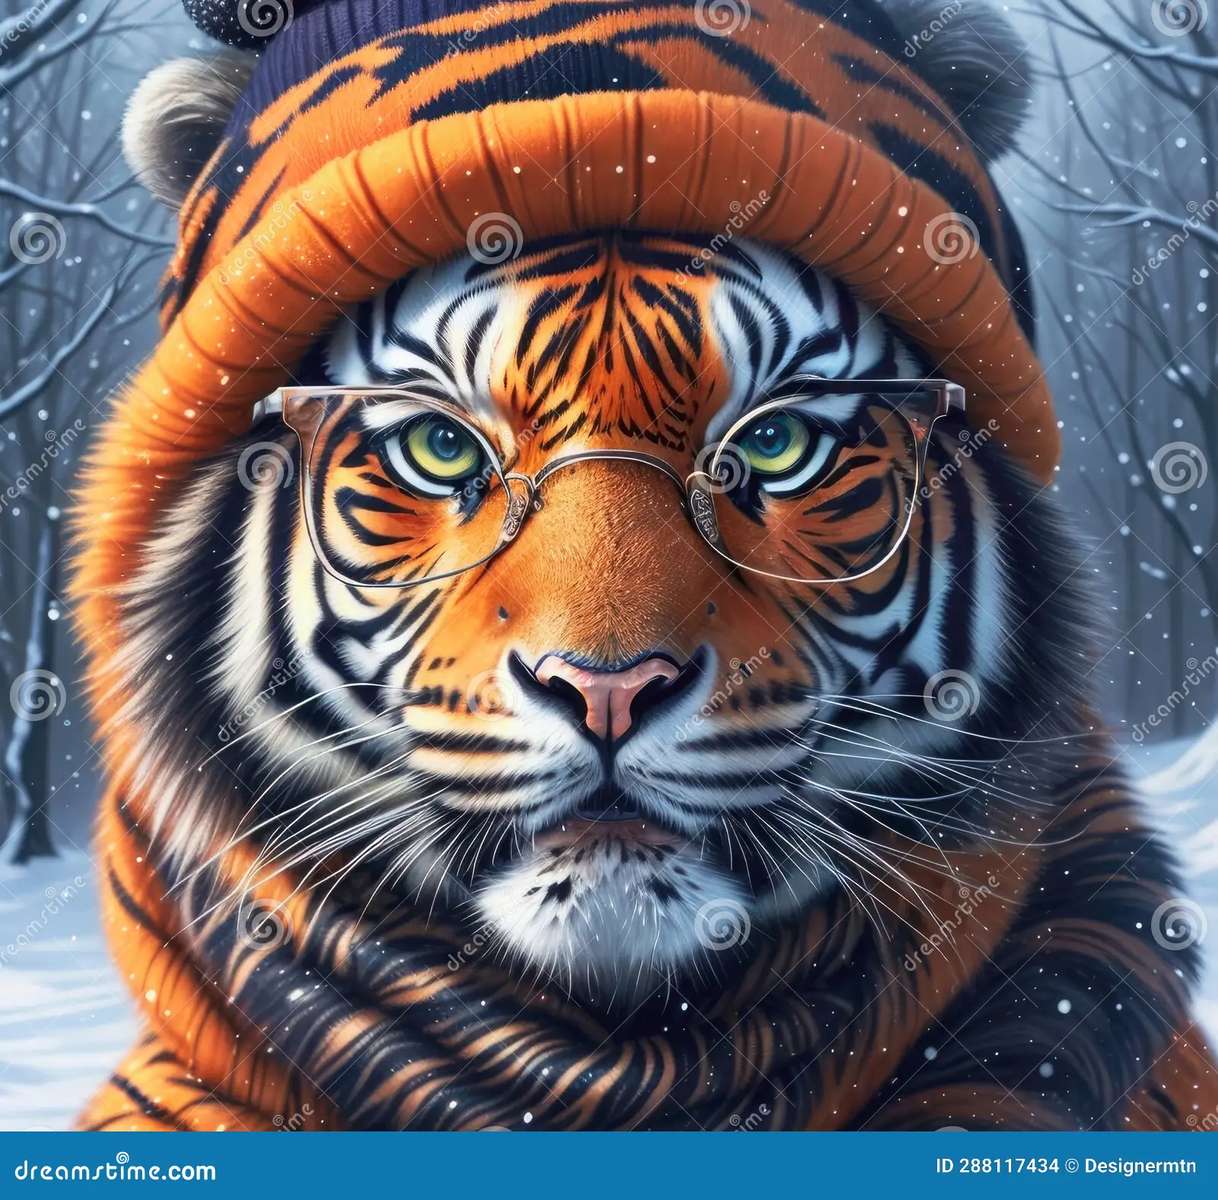 Tiger photo puzzle online from photo